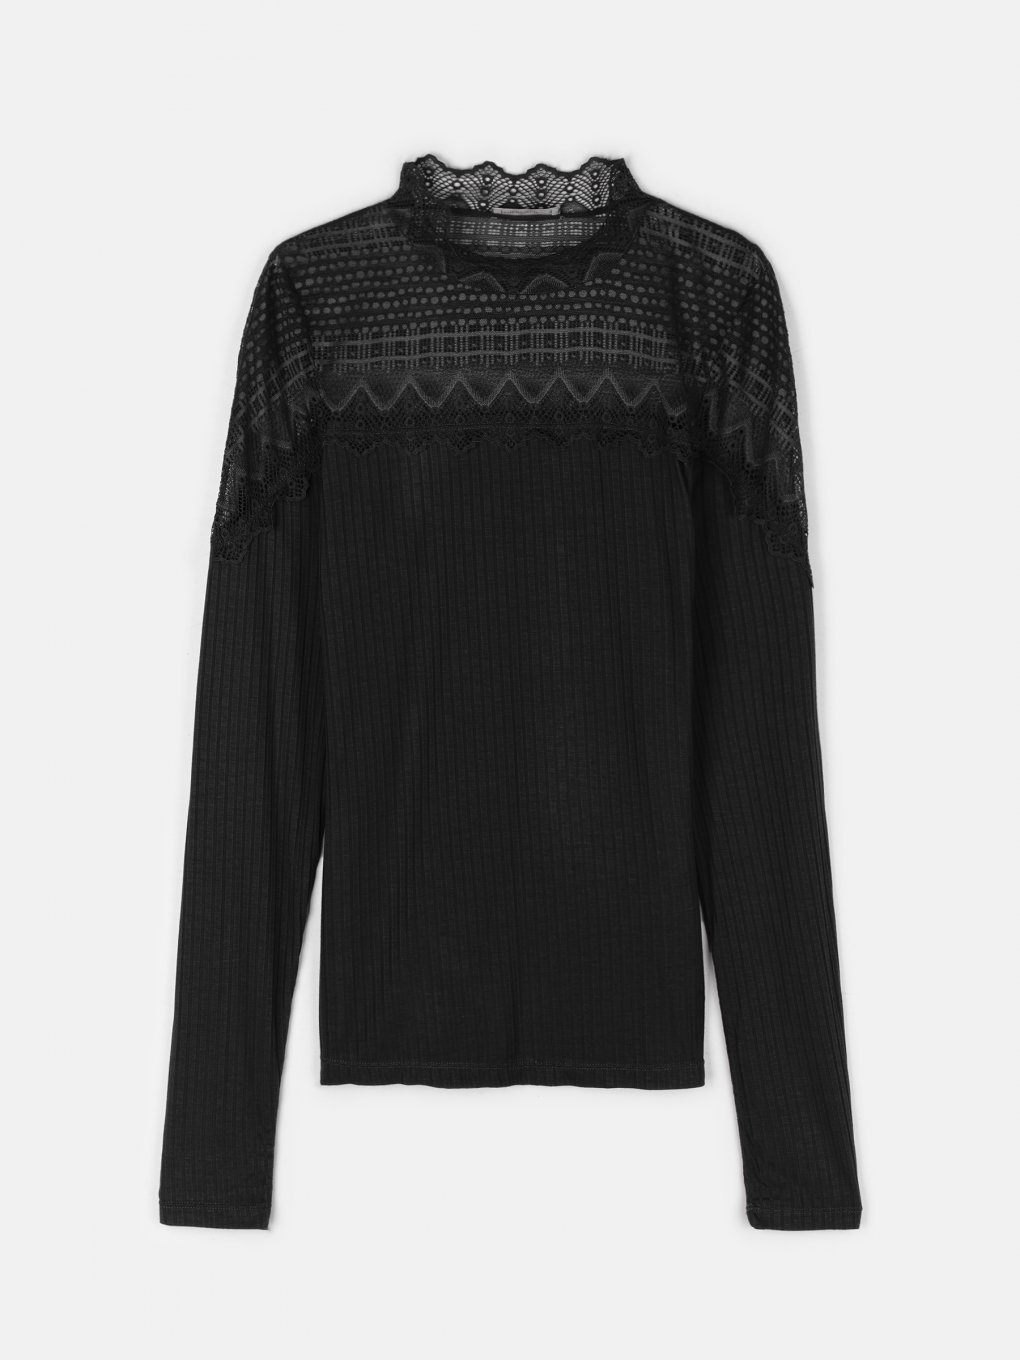 Rollneck T-shirt with long sleeve and lace detail